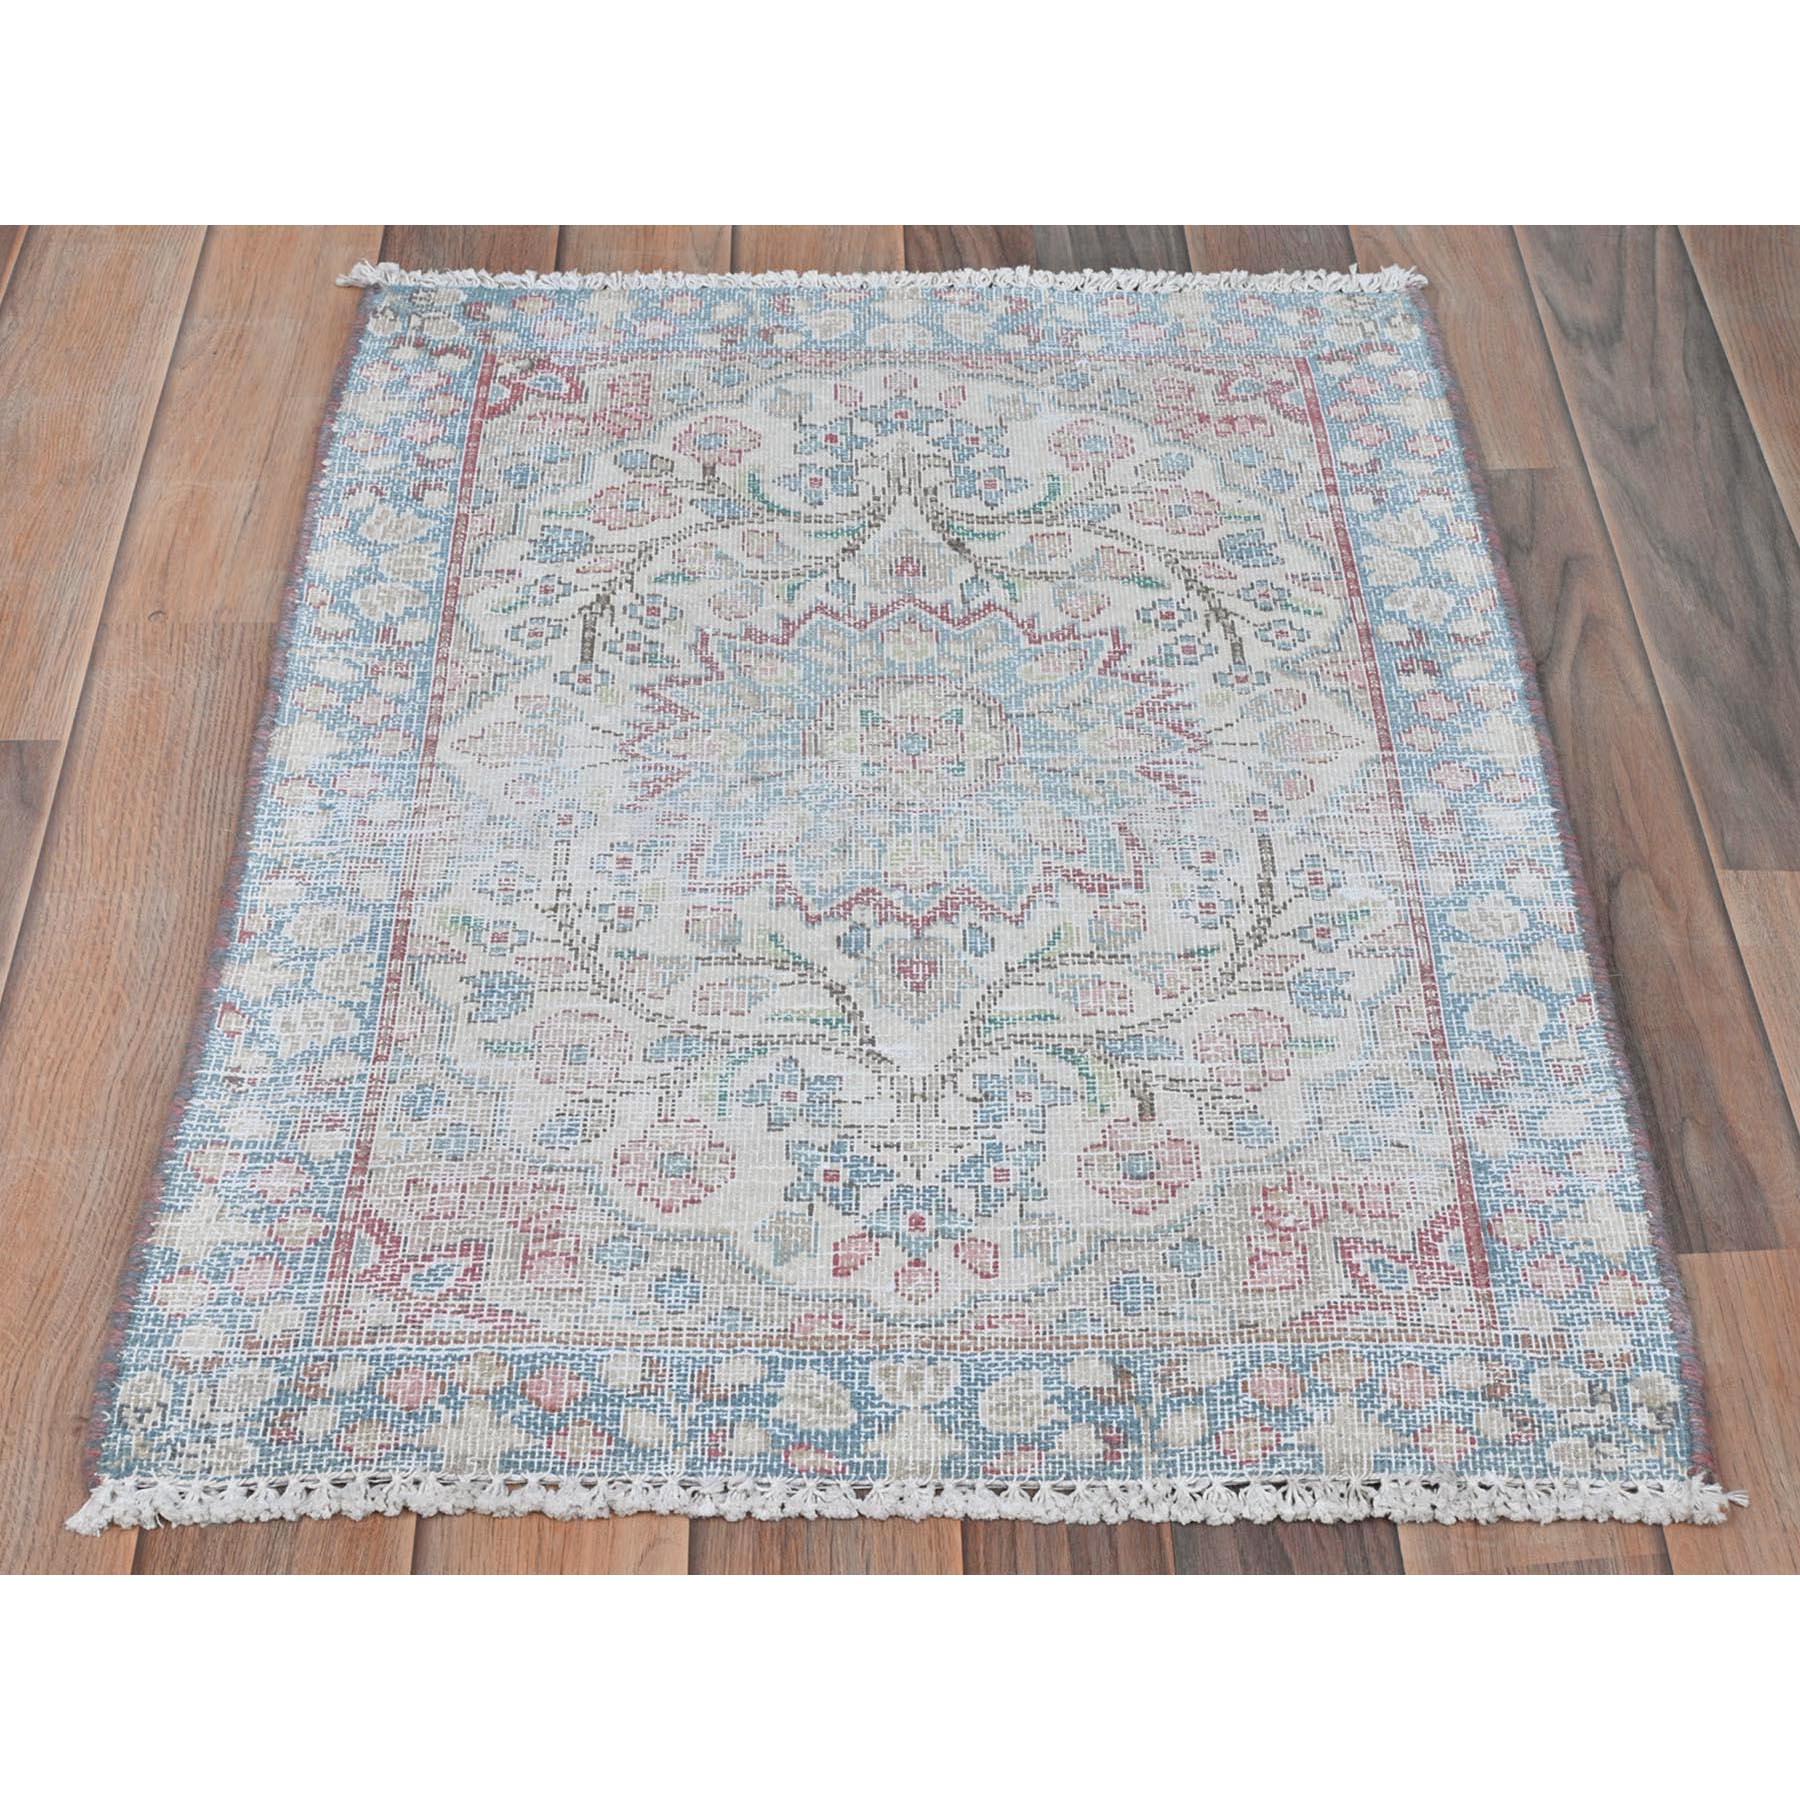 This fabulous hand-knotted carpet has been created and designed for extra strength and durability. This rug has been handcrafted for weeks in the traditional method that is used to make
Exact Rug Size in Feet and Inches : 2'0